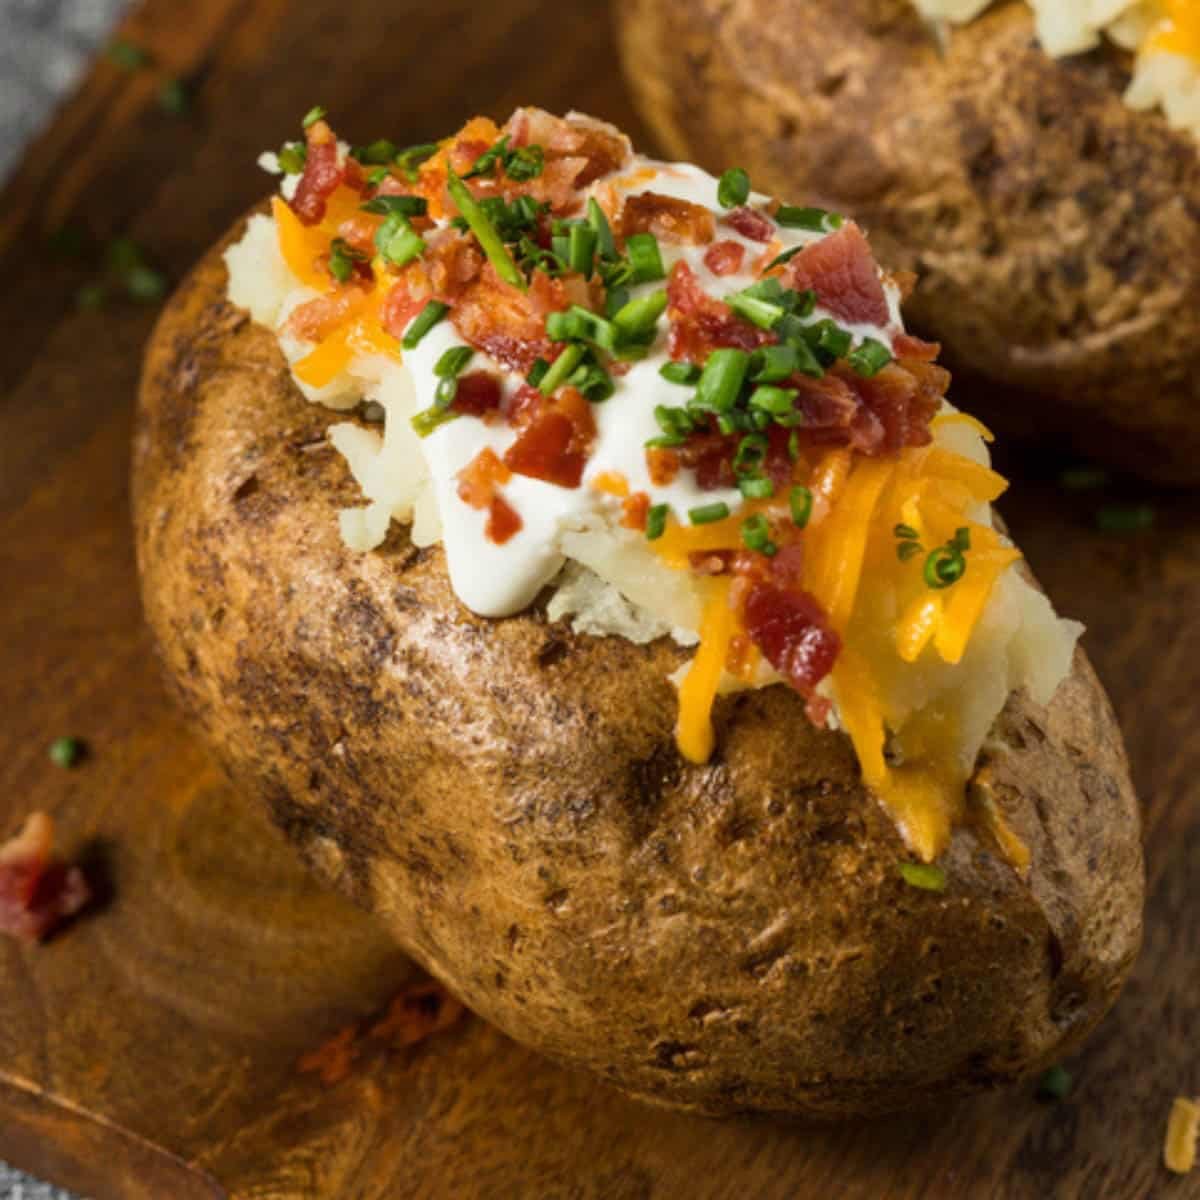 A baked potato filled with sour cream, cheese, bacon and green onions